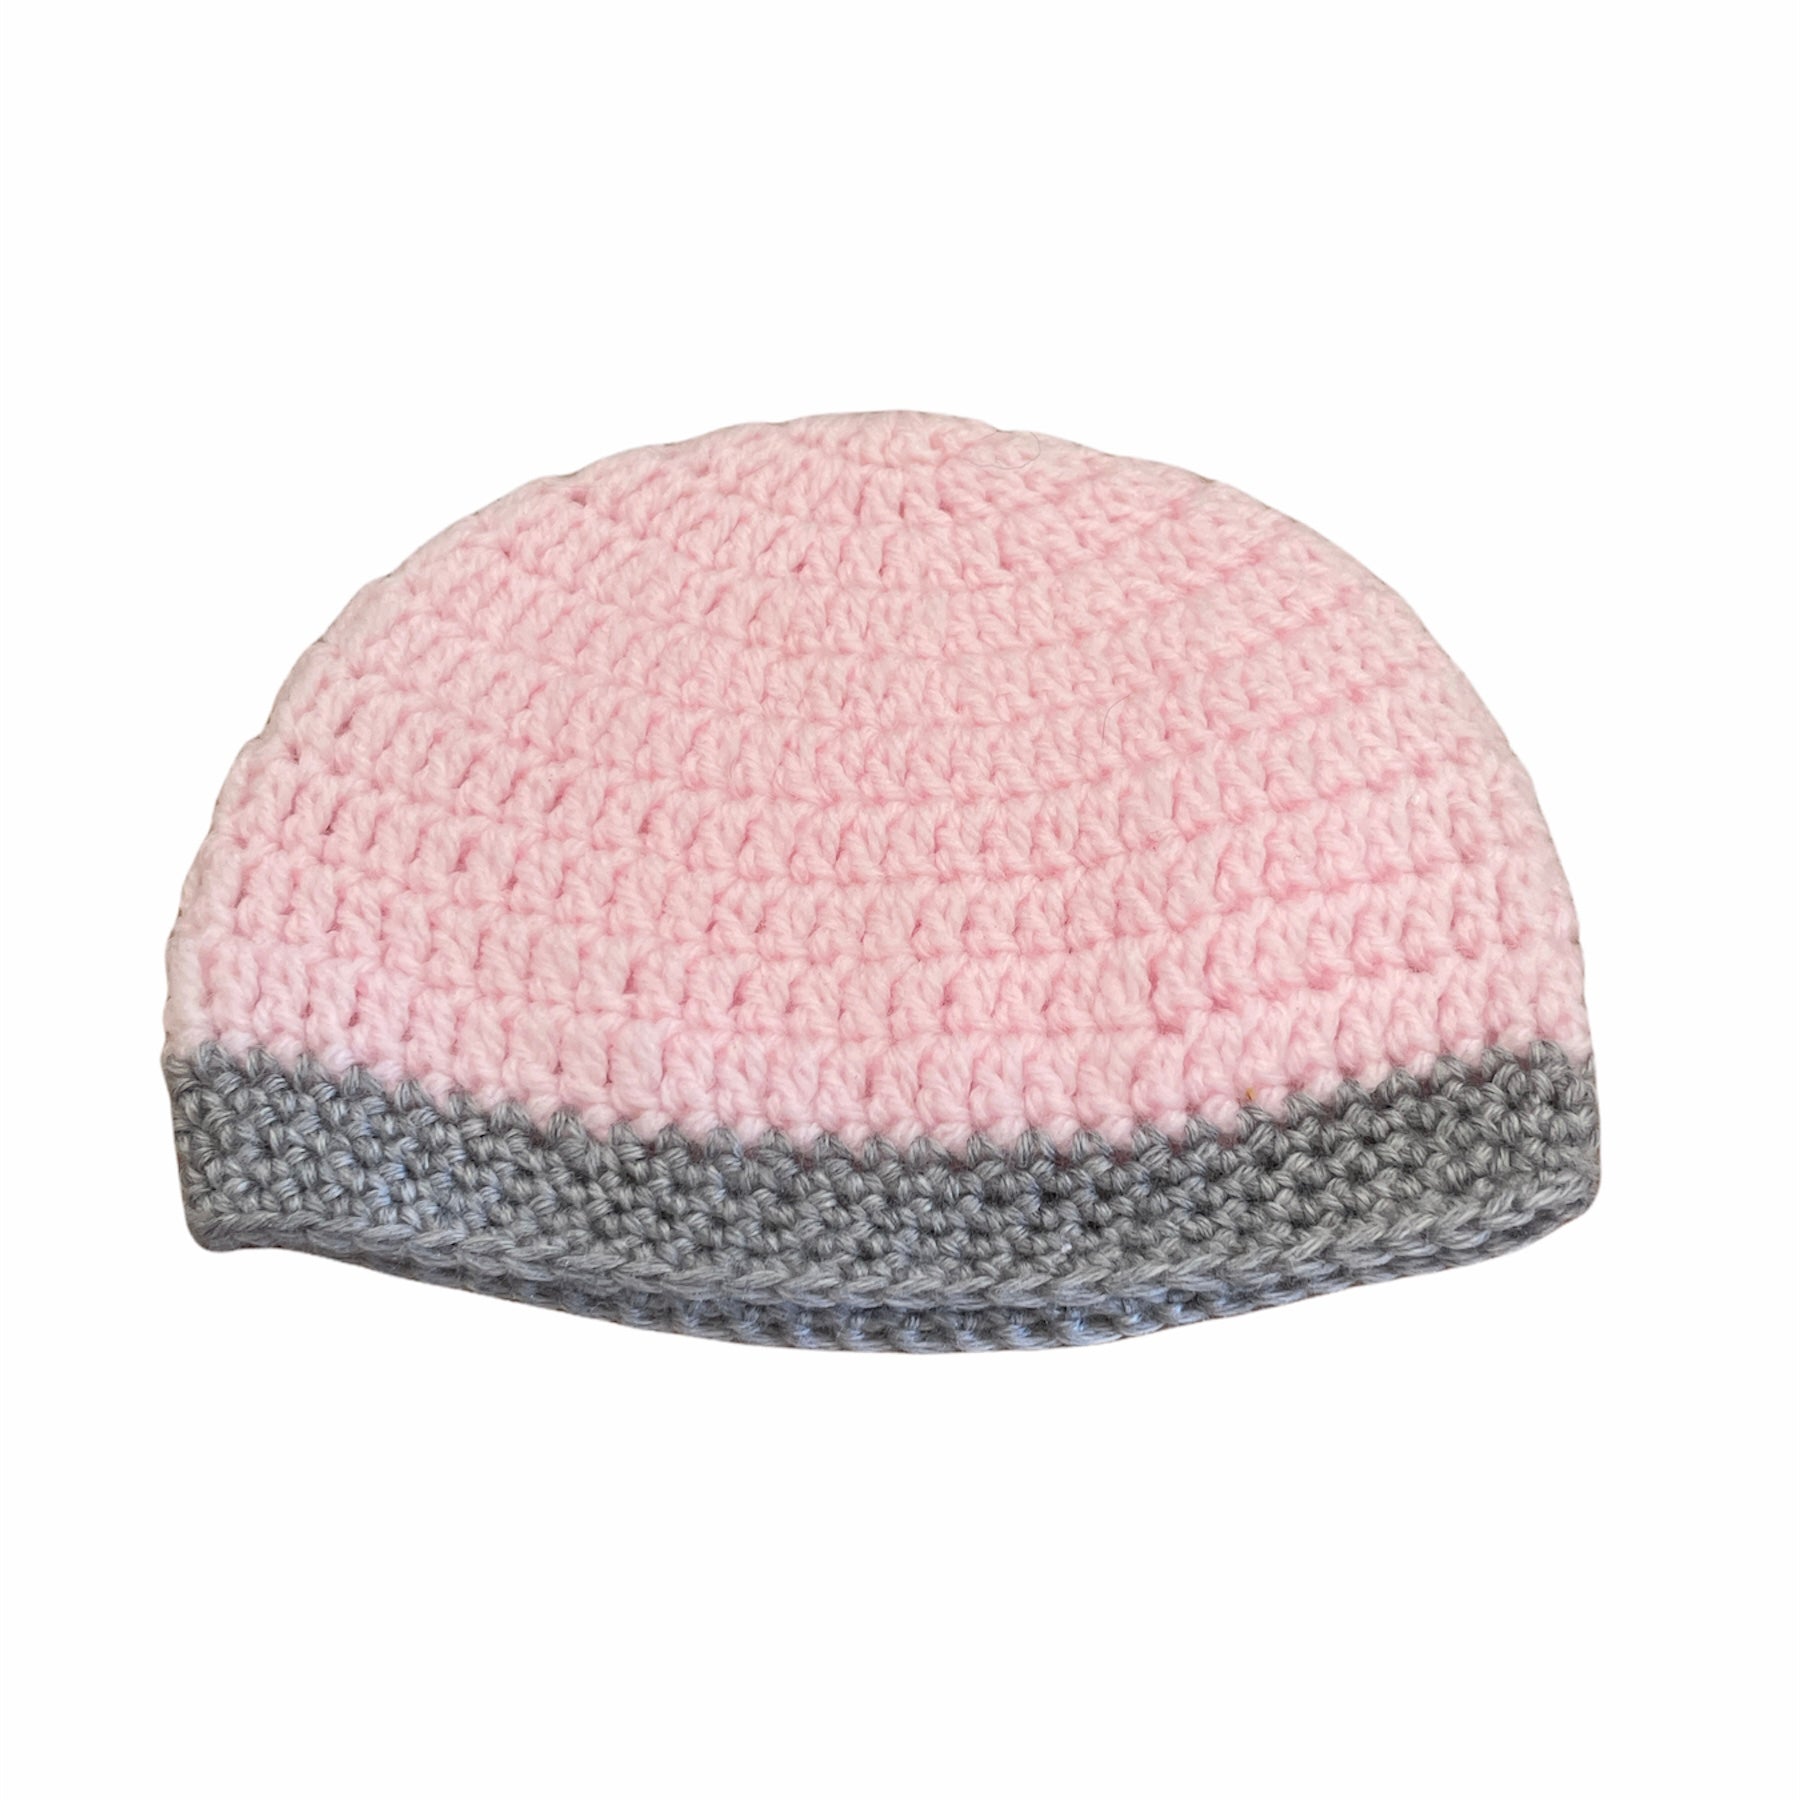 Pink and grey crochet beanie - 3-6 months